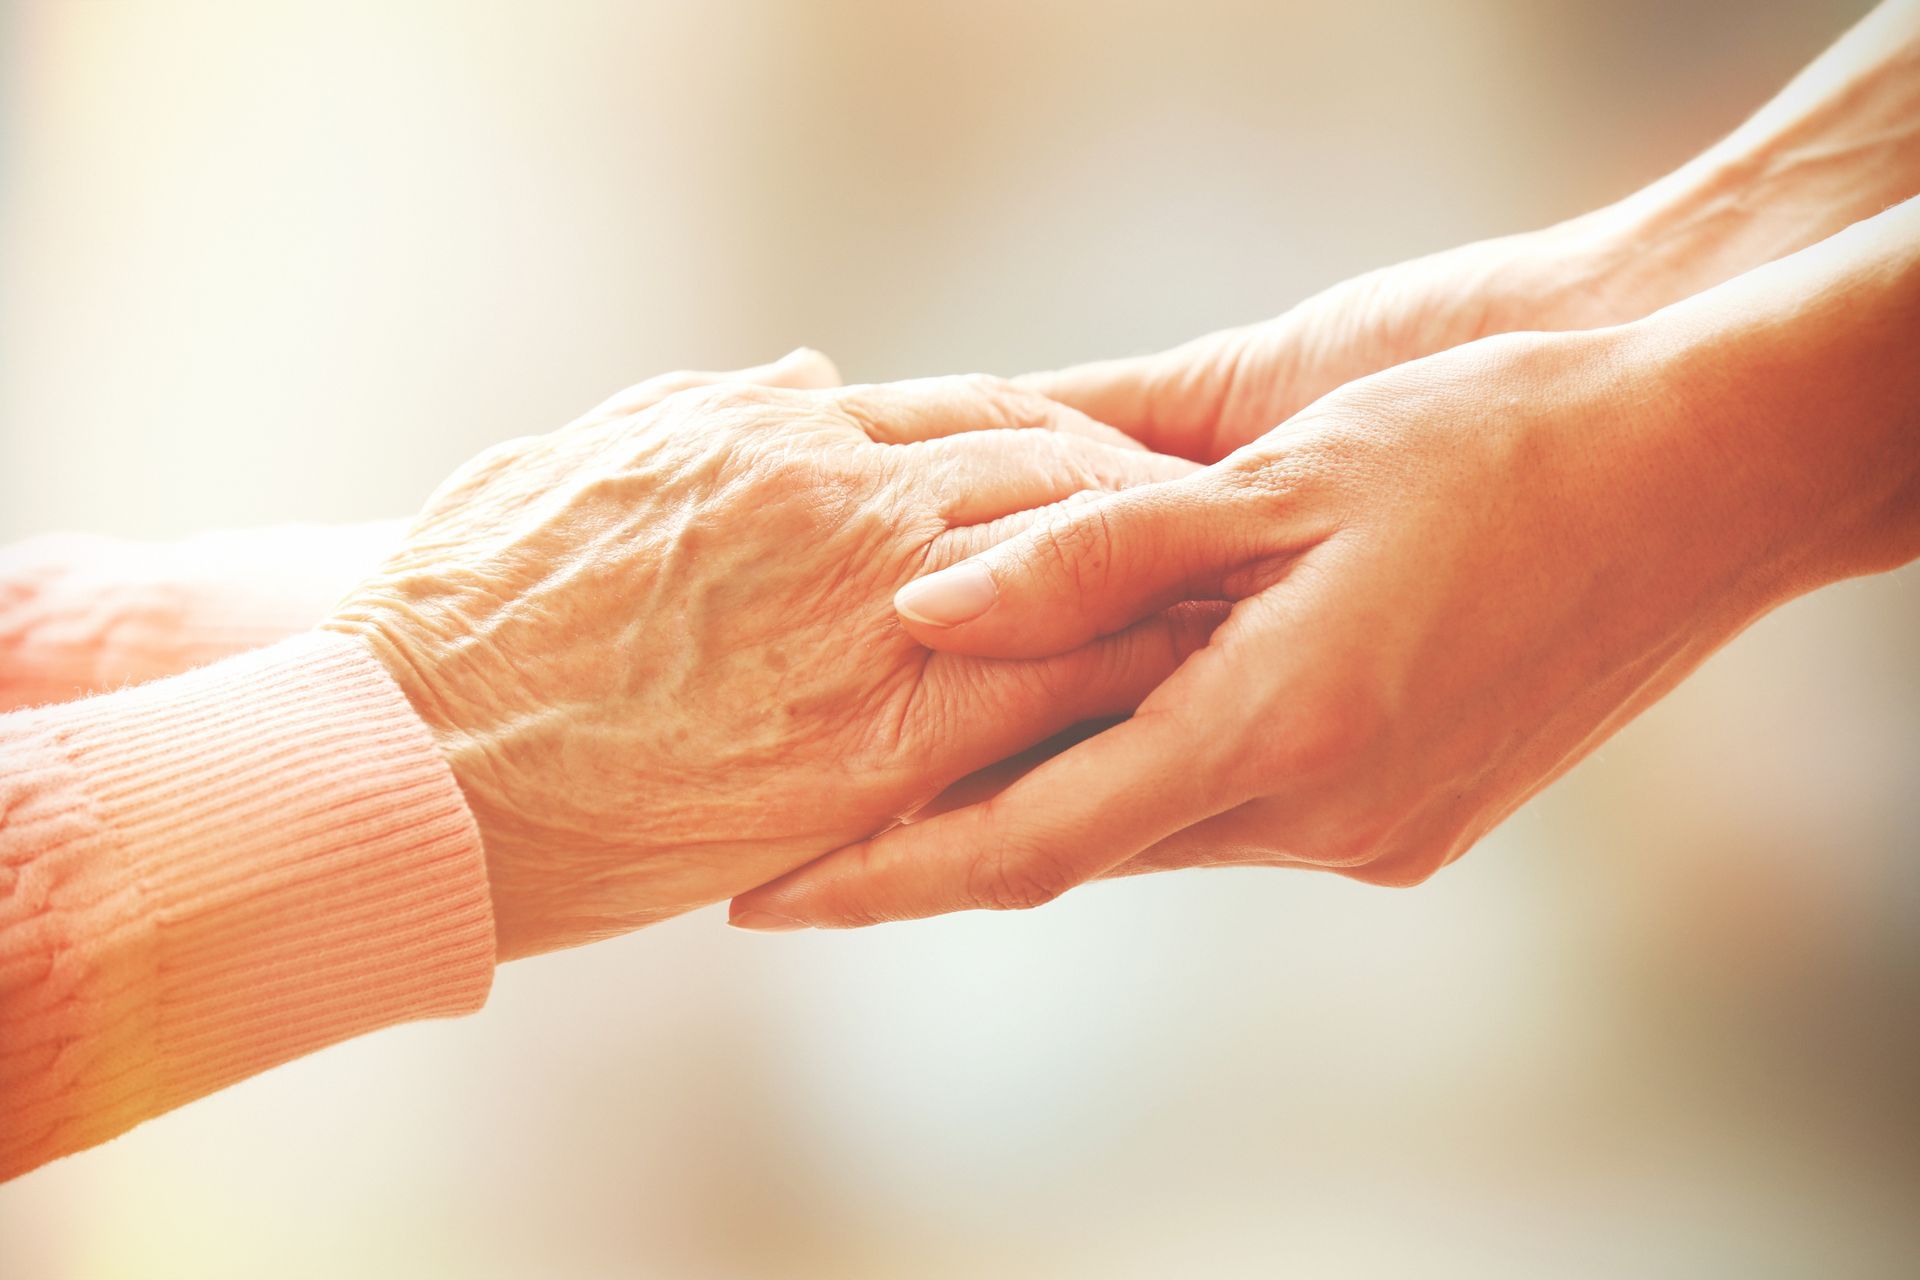 A woman is holding the hand of an older woman.